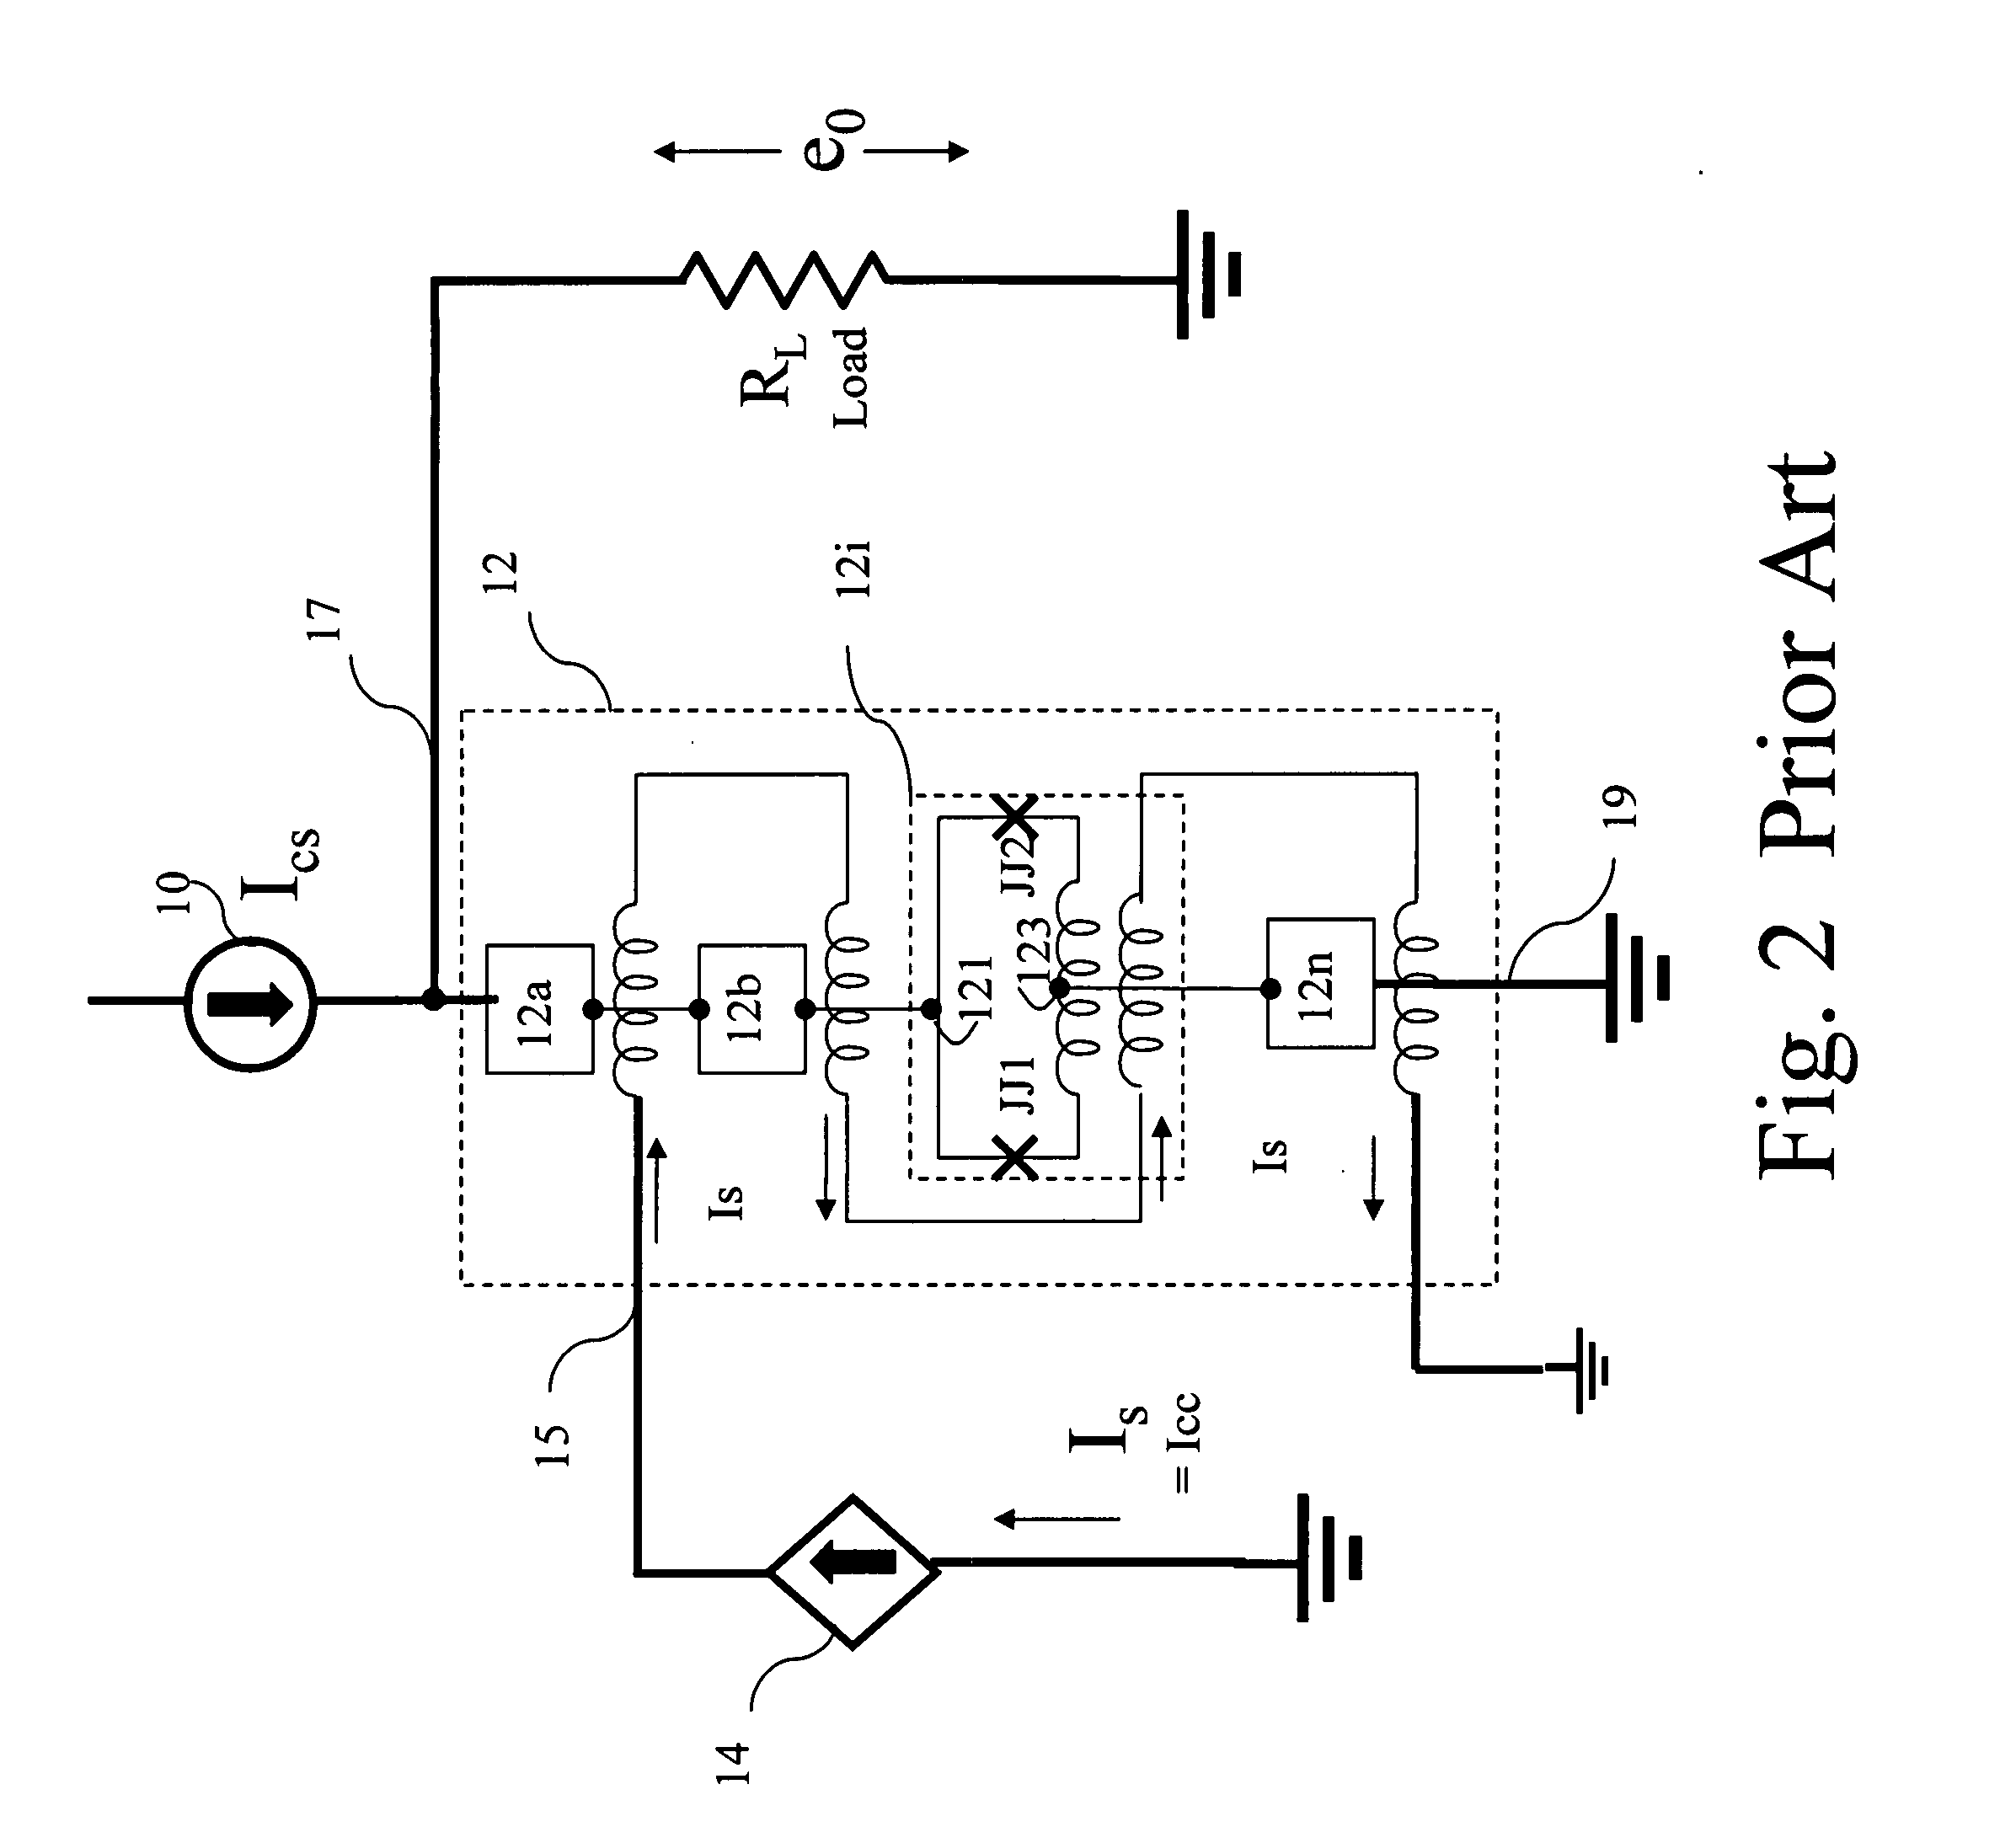 Superconducting switching amplifier